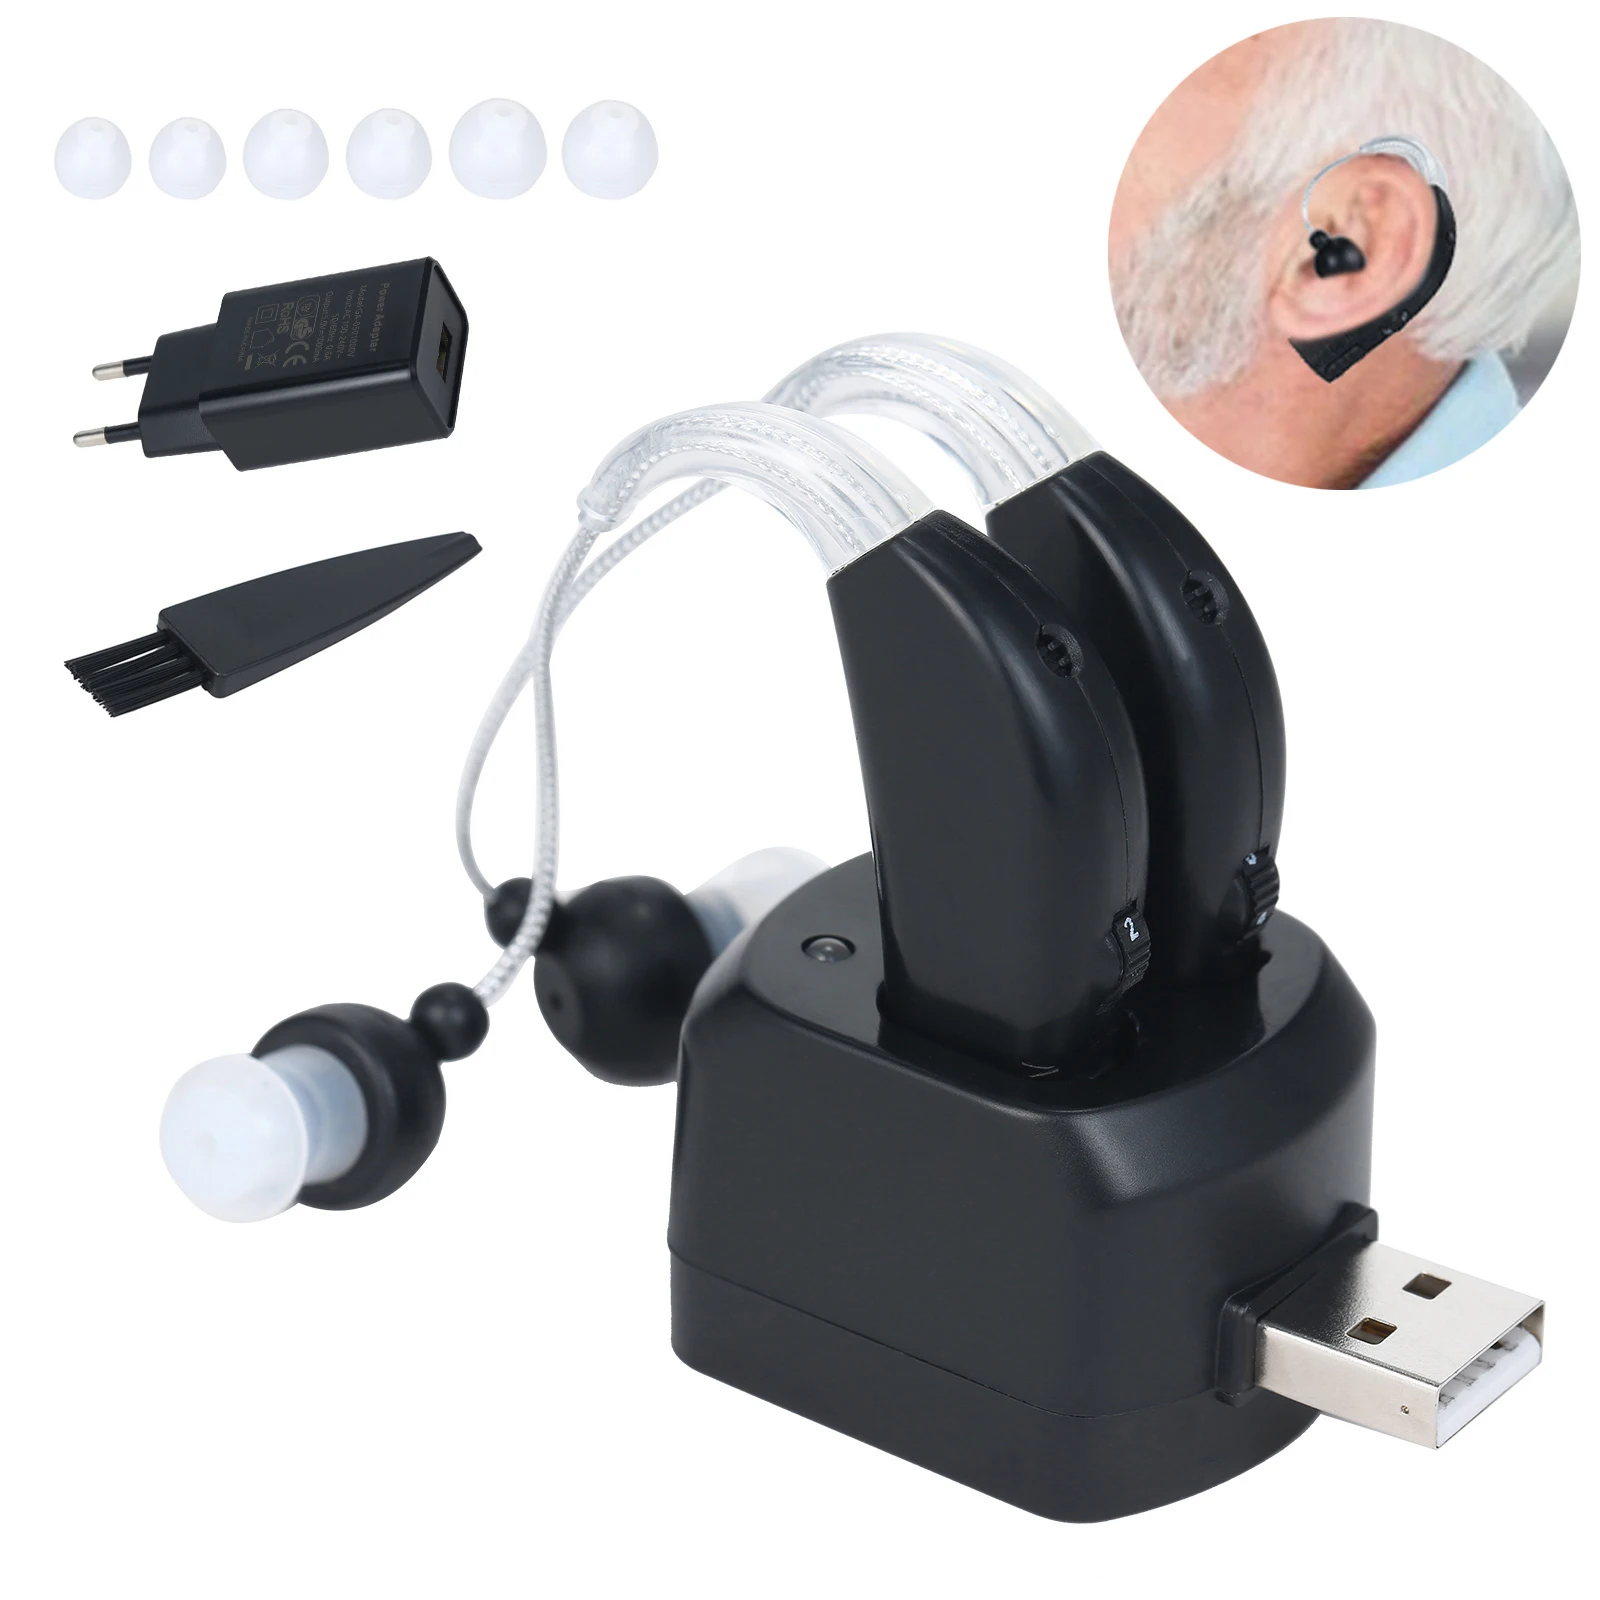 

Hot Sell USB Dual Charge Hearing Aids Sound Amplifier Black Behind the Ear Deaf Help Father Gift